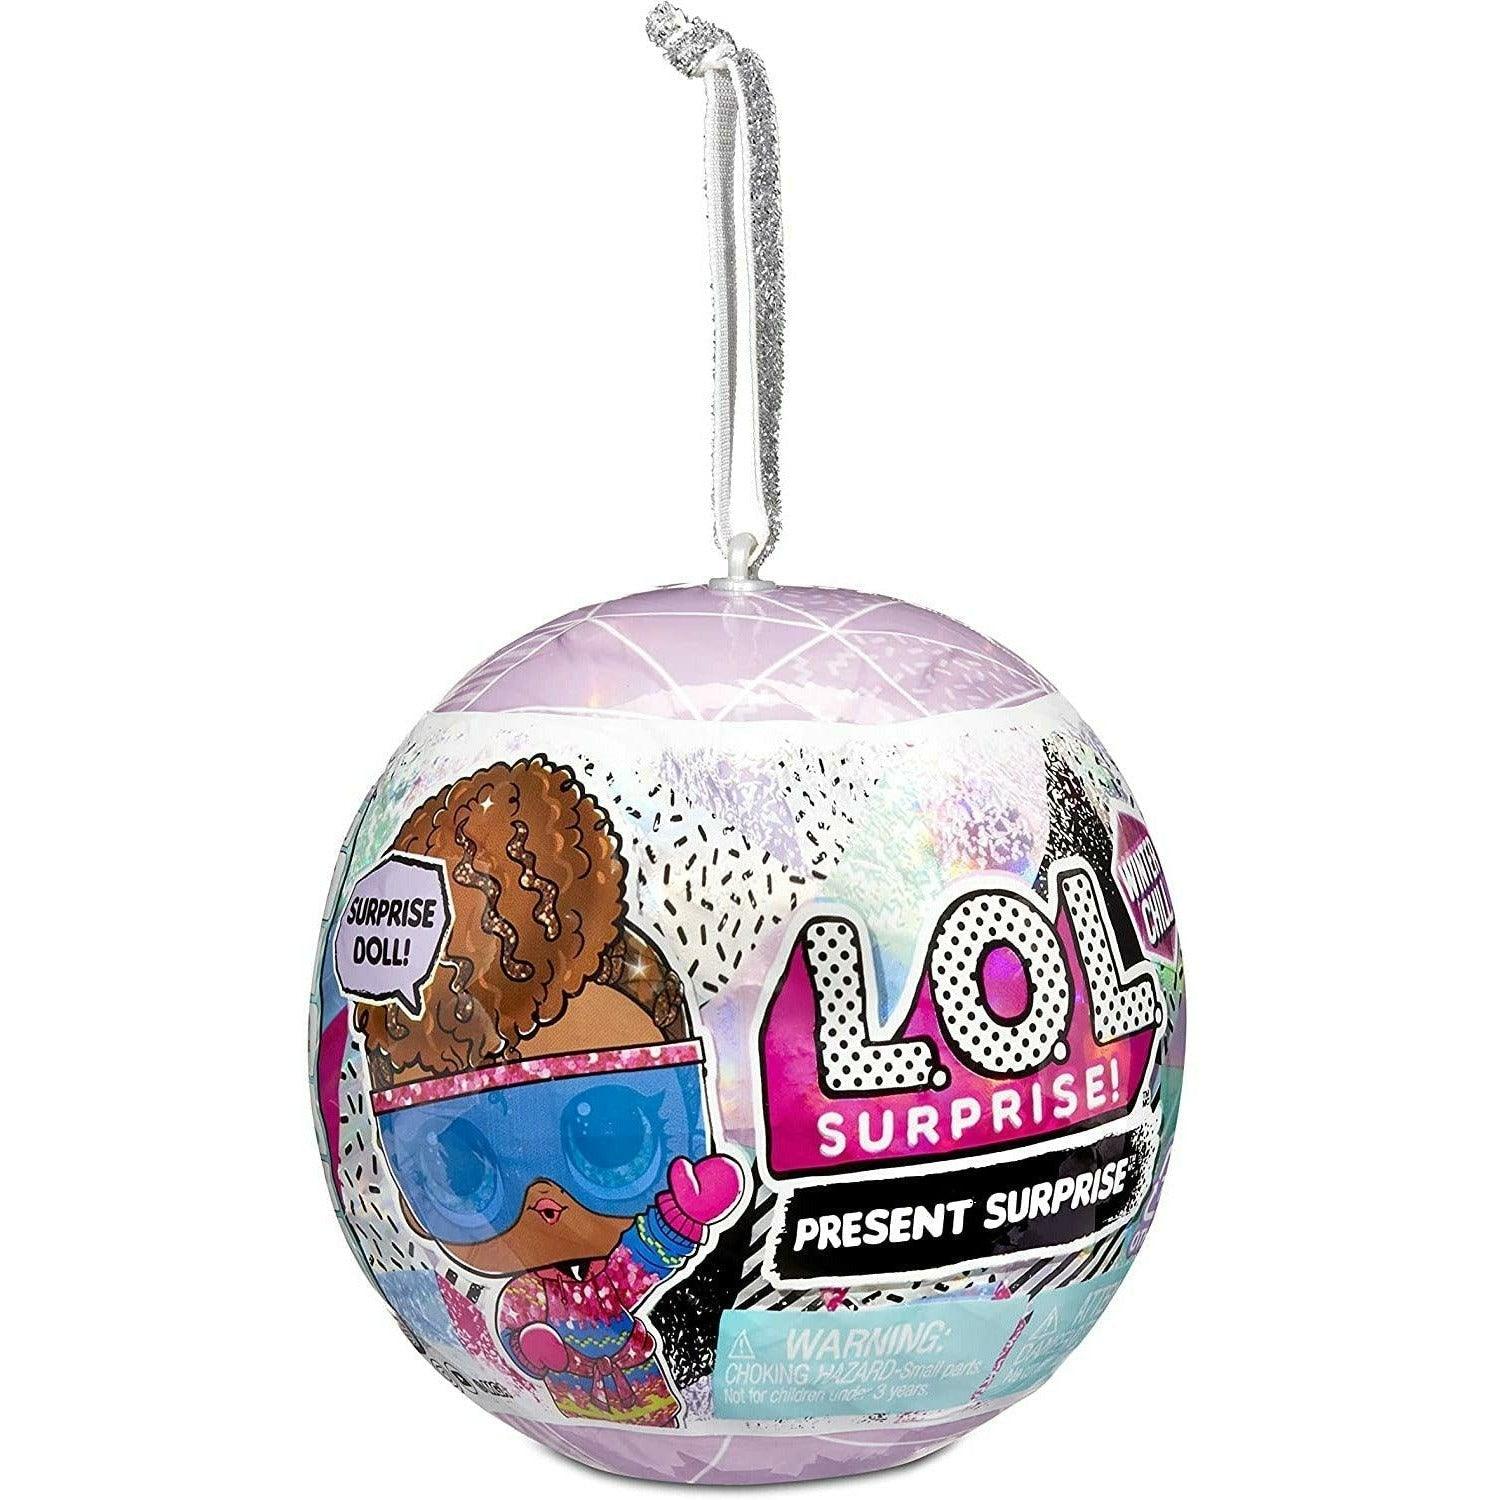 L.O.L Surprise Winter Chill Dolls with 8 Surprises Including Collectible Doll with Winter Fashion Outfits, Accessories, Holiday Ornament Ball - BumbleToys - 5-7 Years, Dolls, Girls, L.O.L, Miniature Dolls & Accessories, OXE